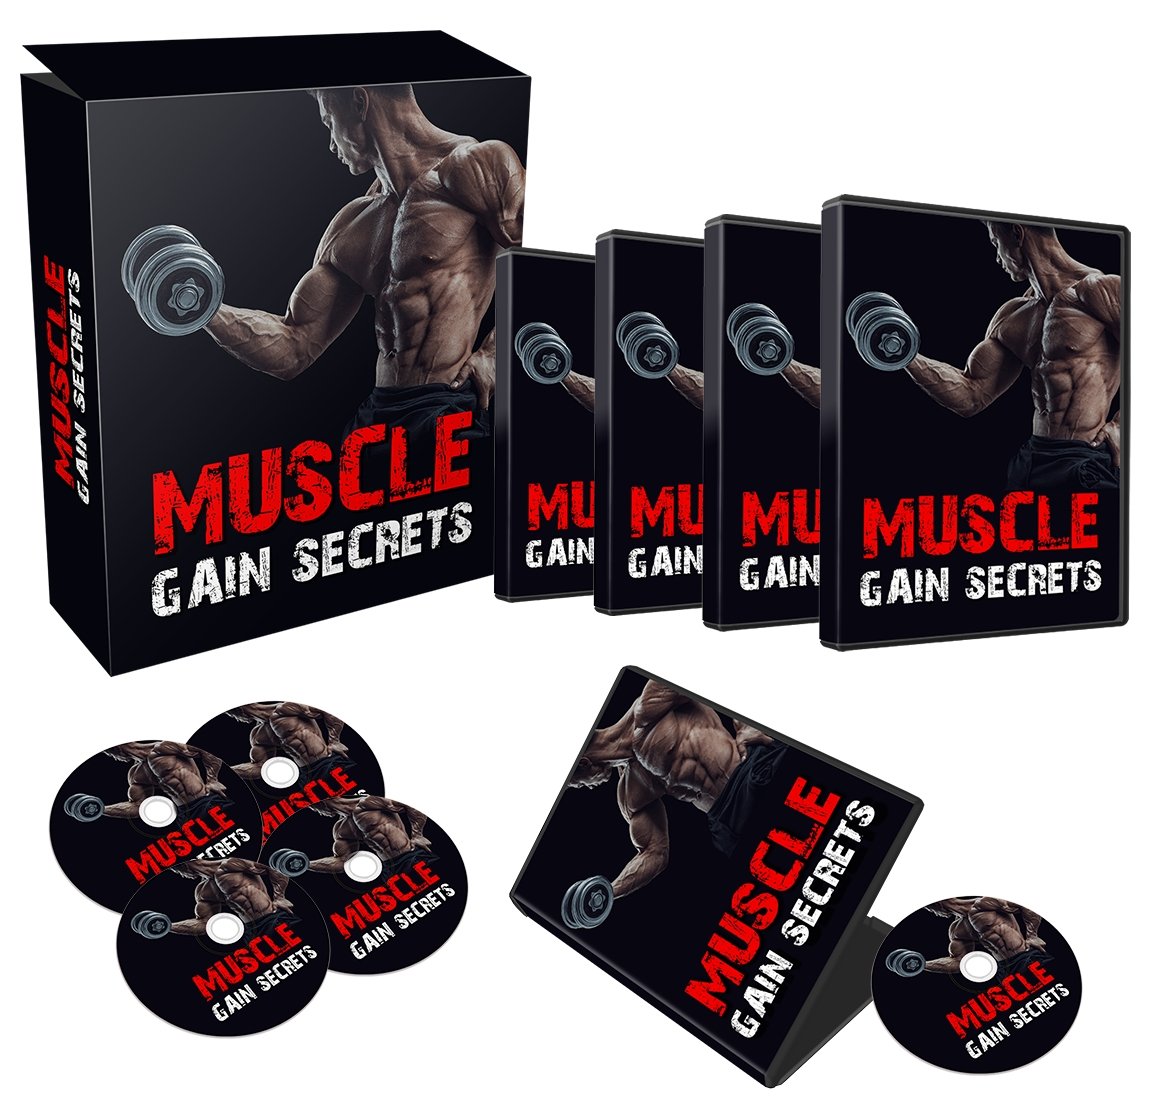 MUSCLE GAIN SECRETS - For Fathers Fitness